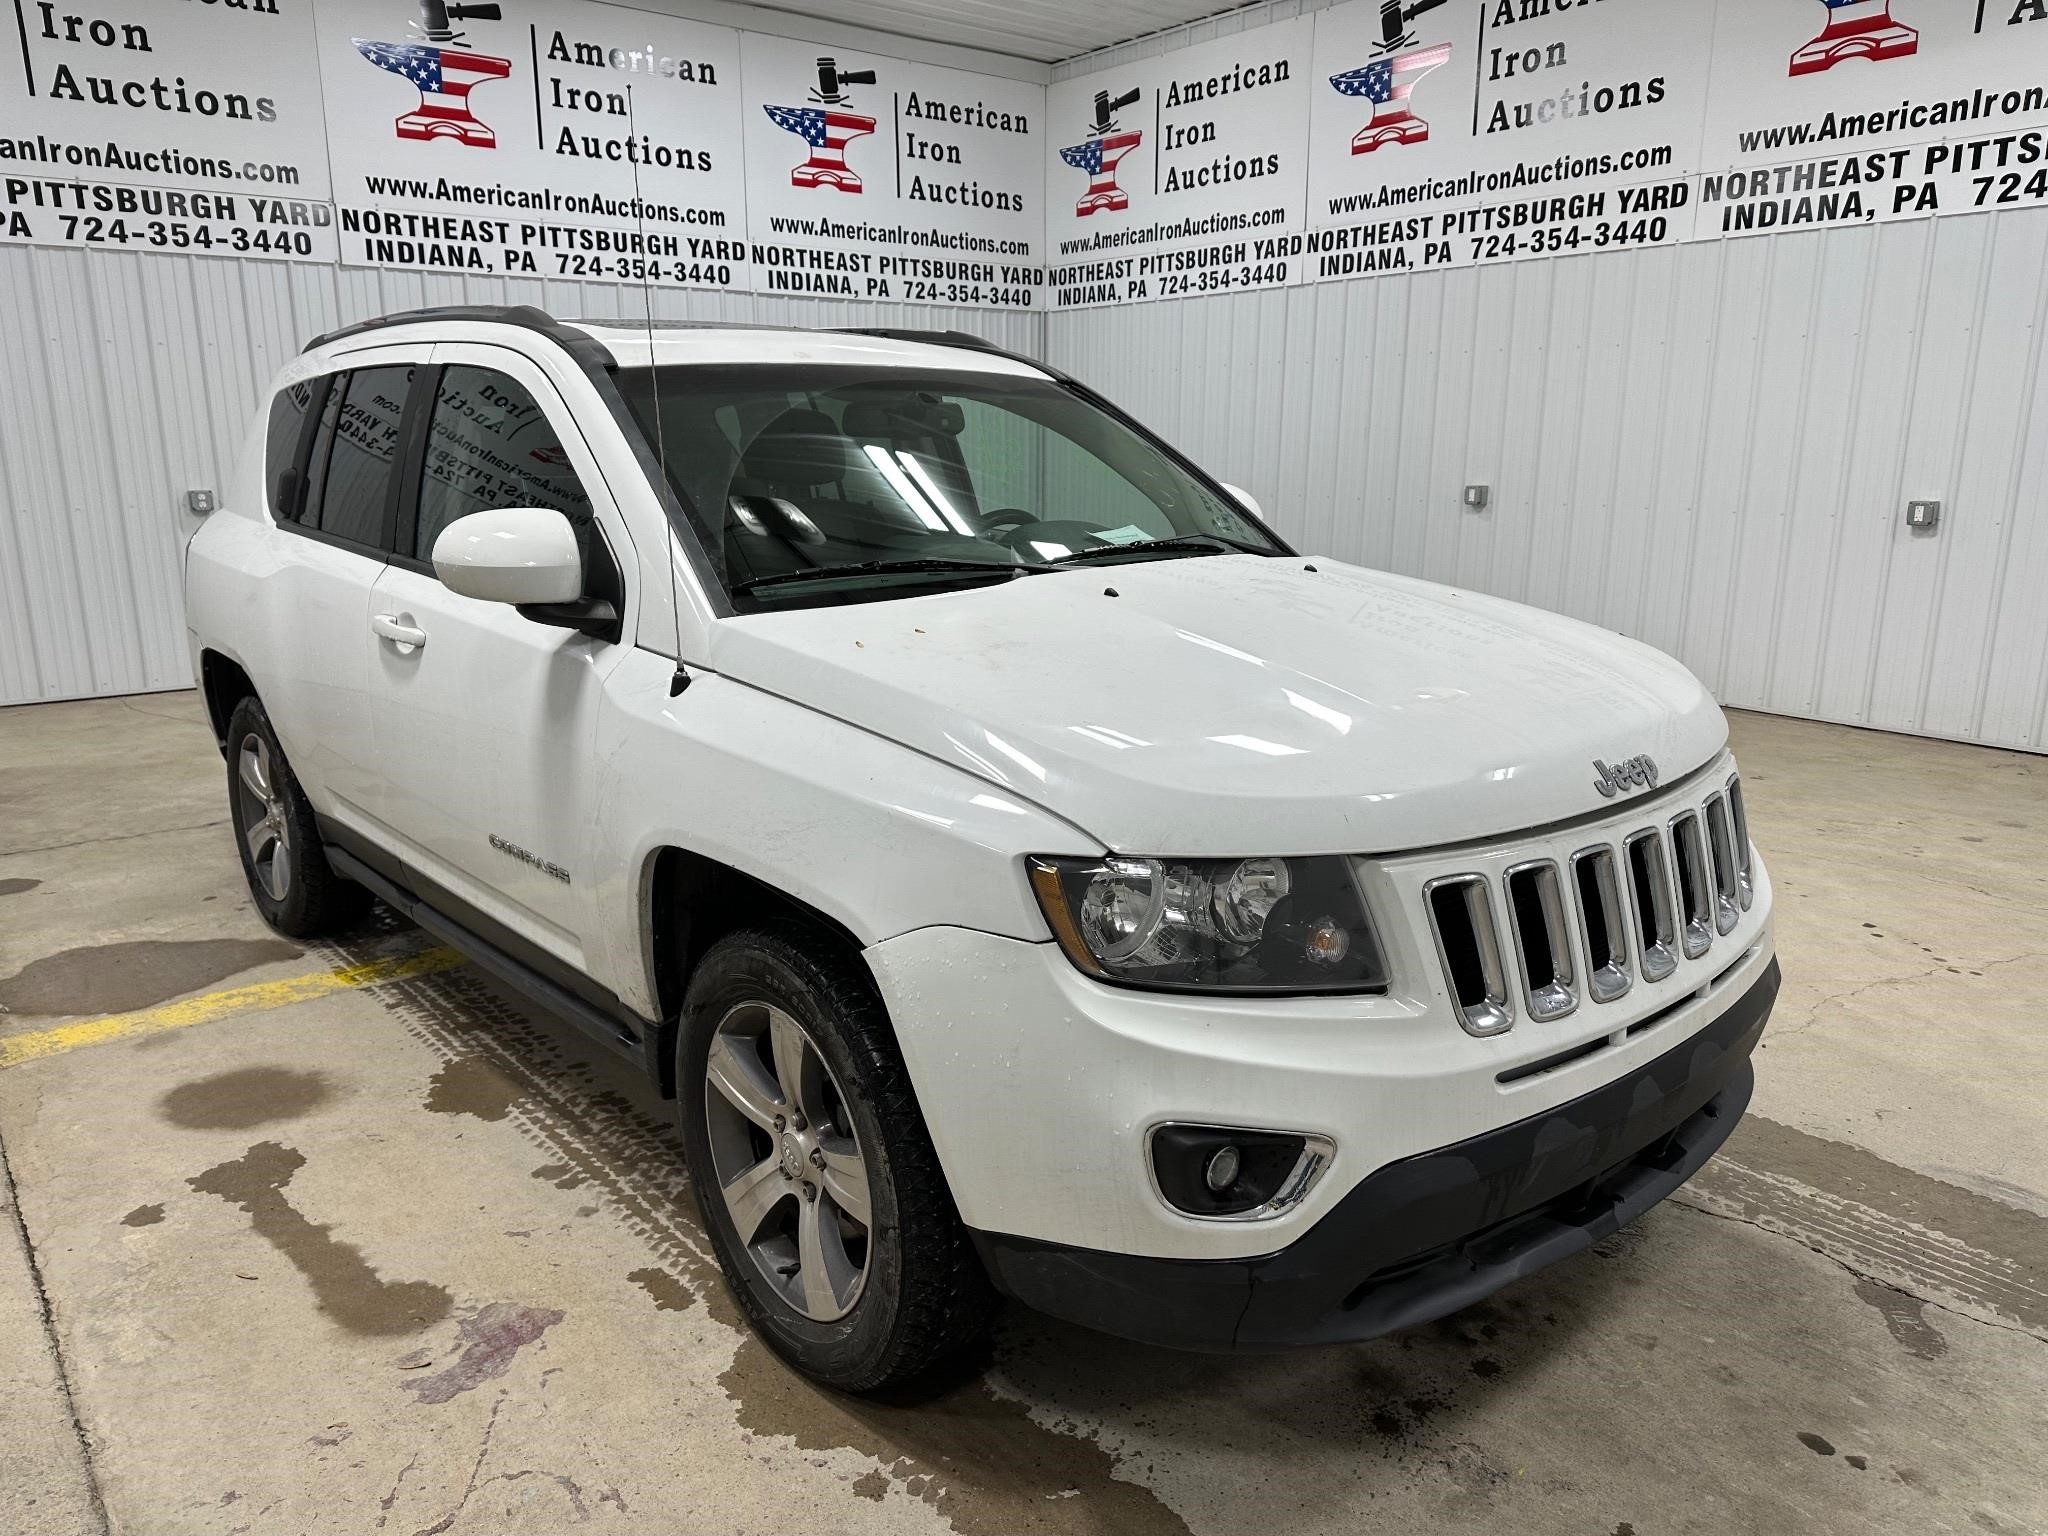 2017 Jeep Compass SUV-CERTIFICATE OF SALVAGE